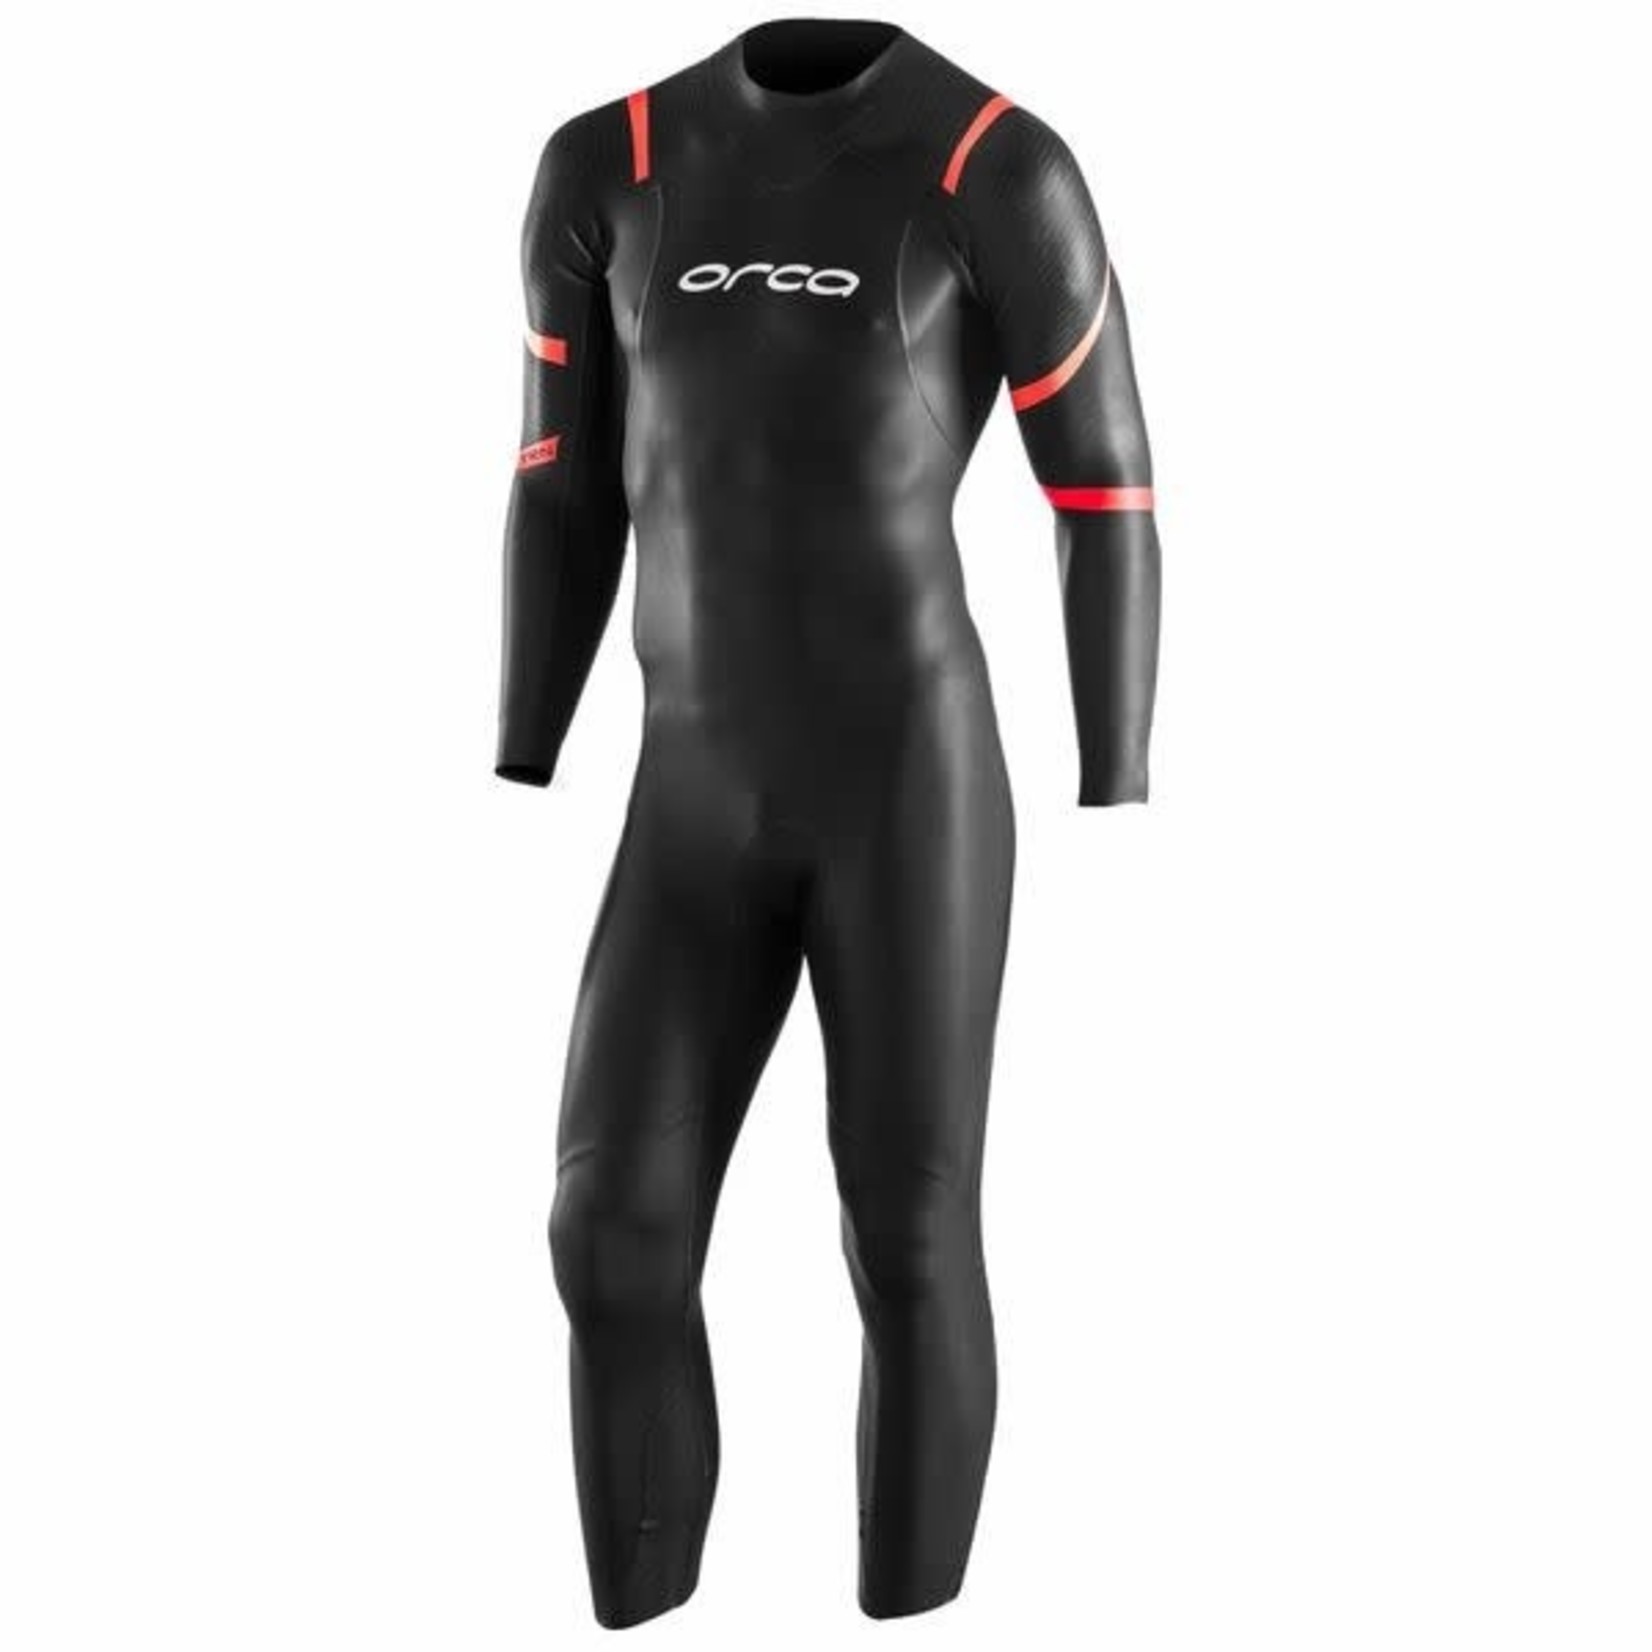 Orca Orca TRN openwater wetsuit